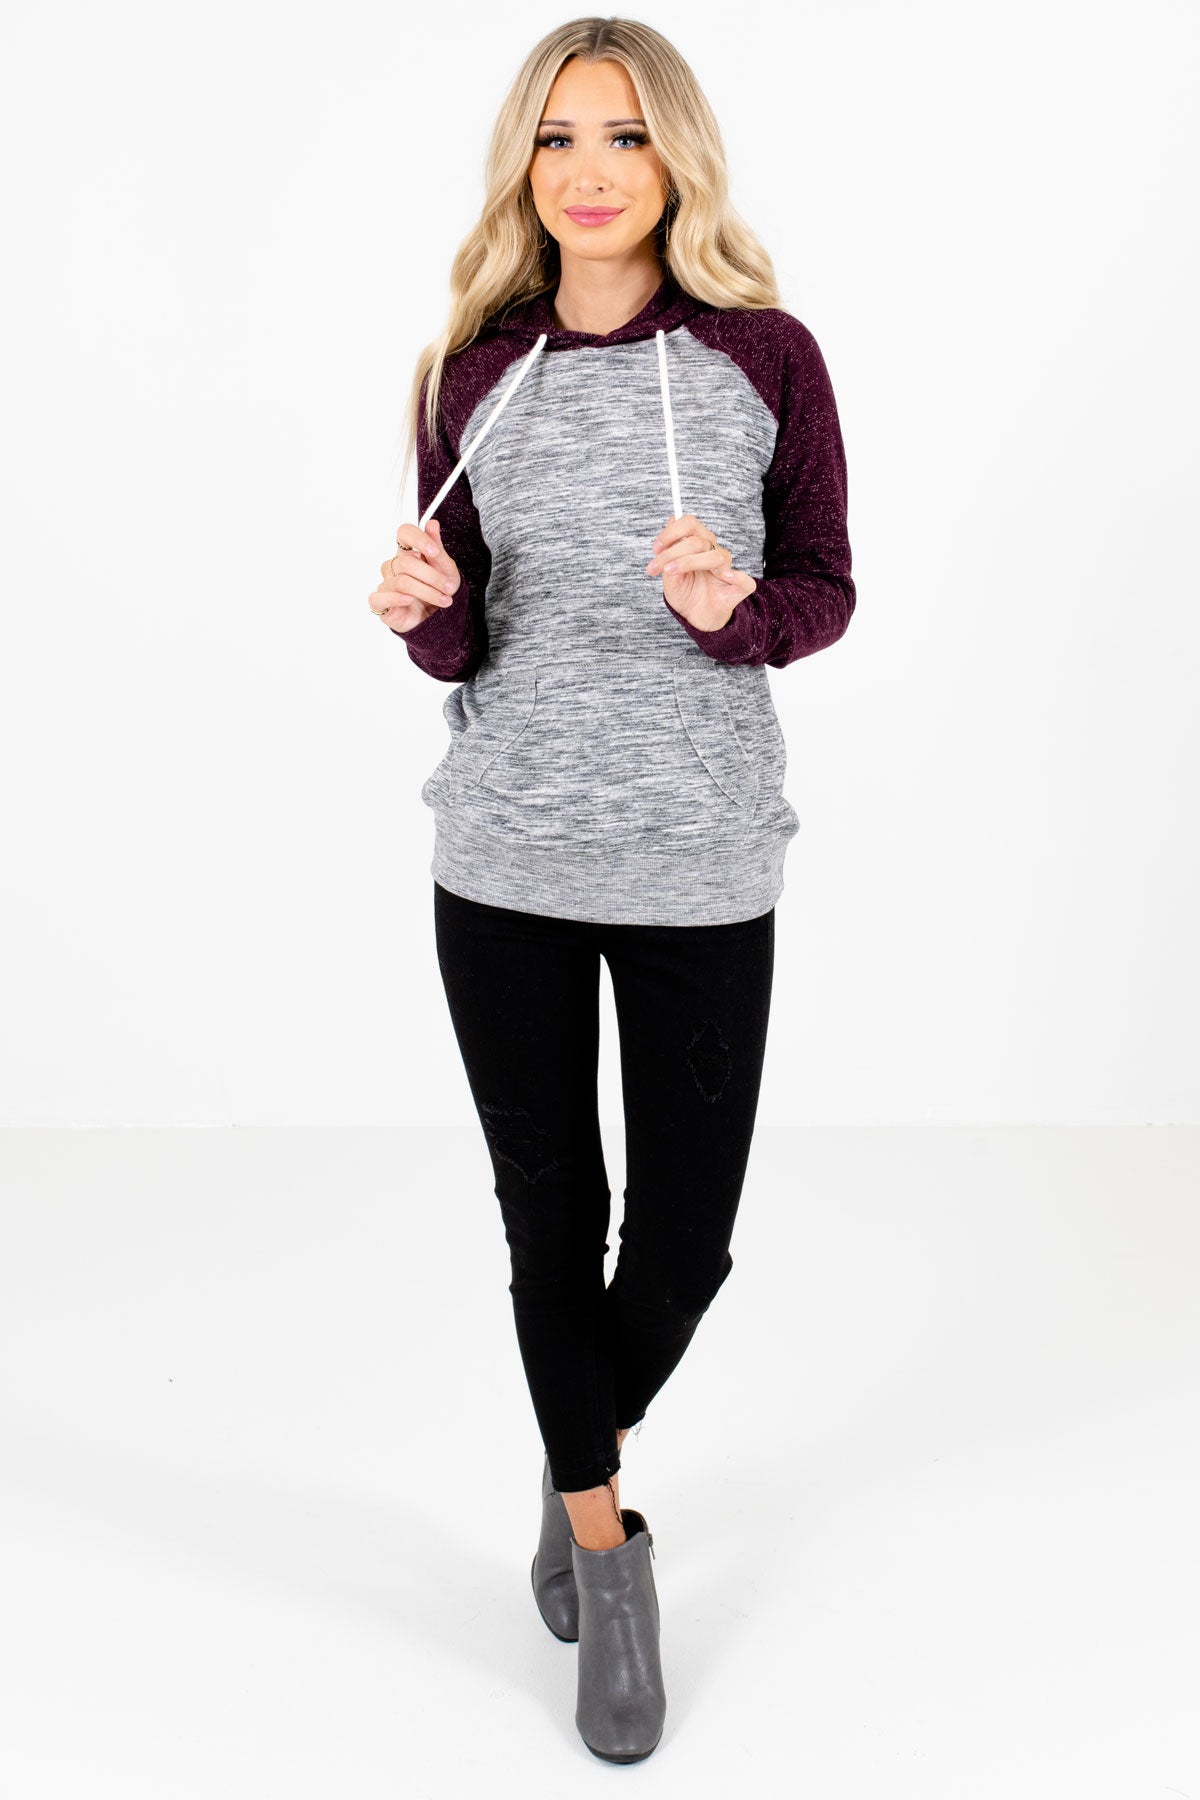 Women’s Purple Fall and Winter Boutique Clothing